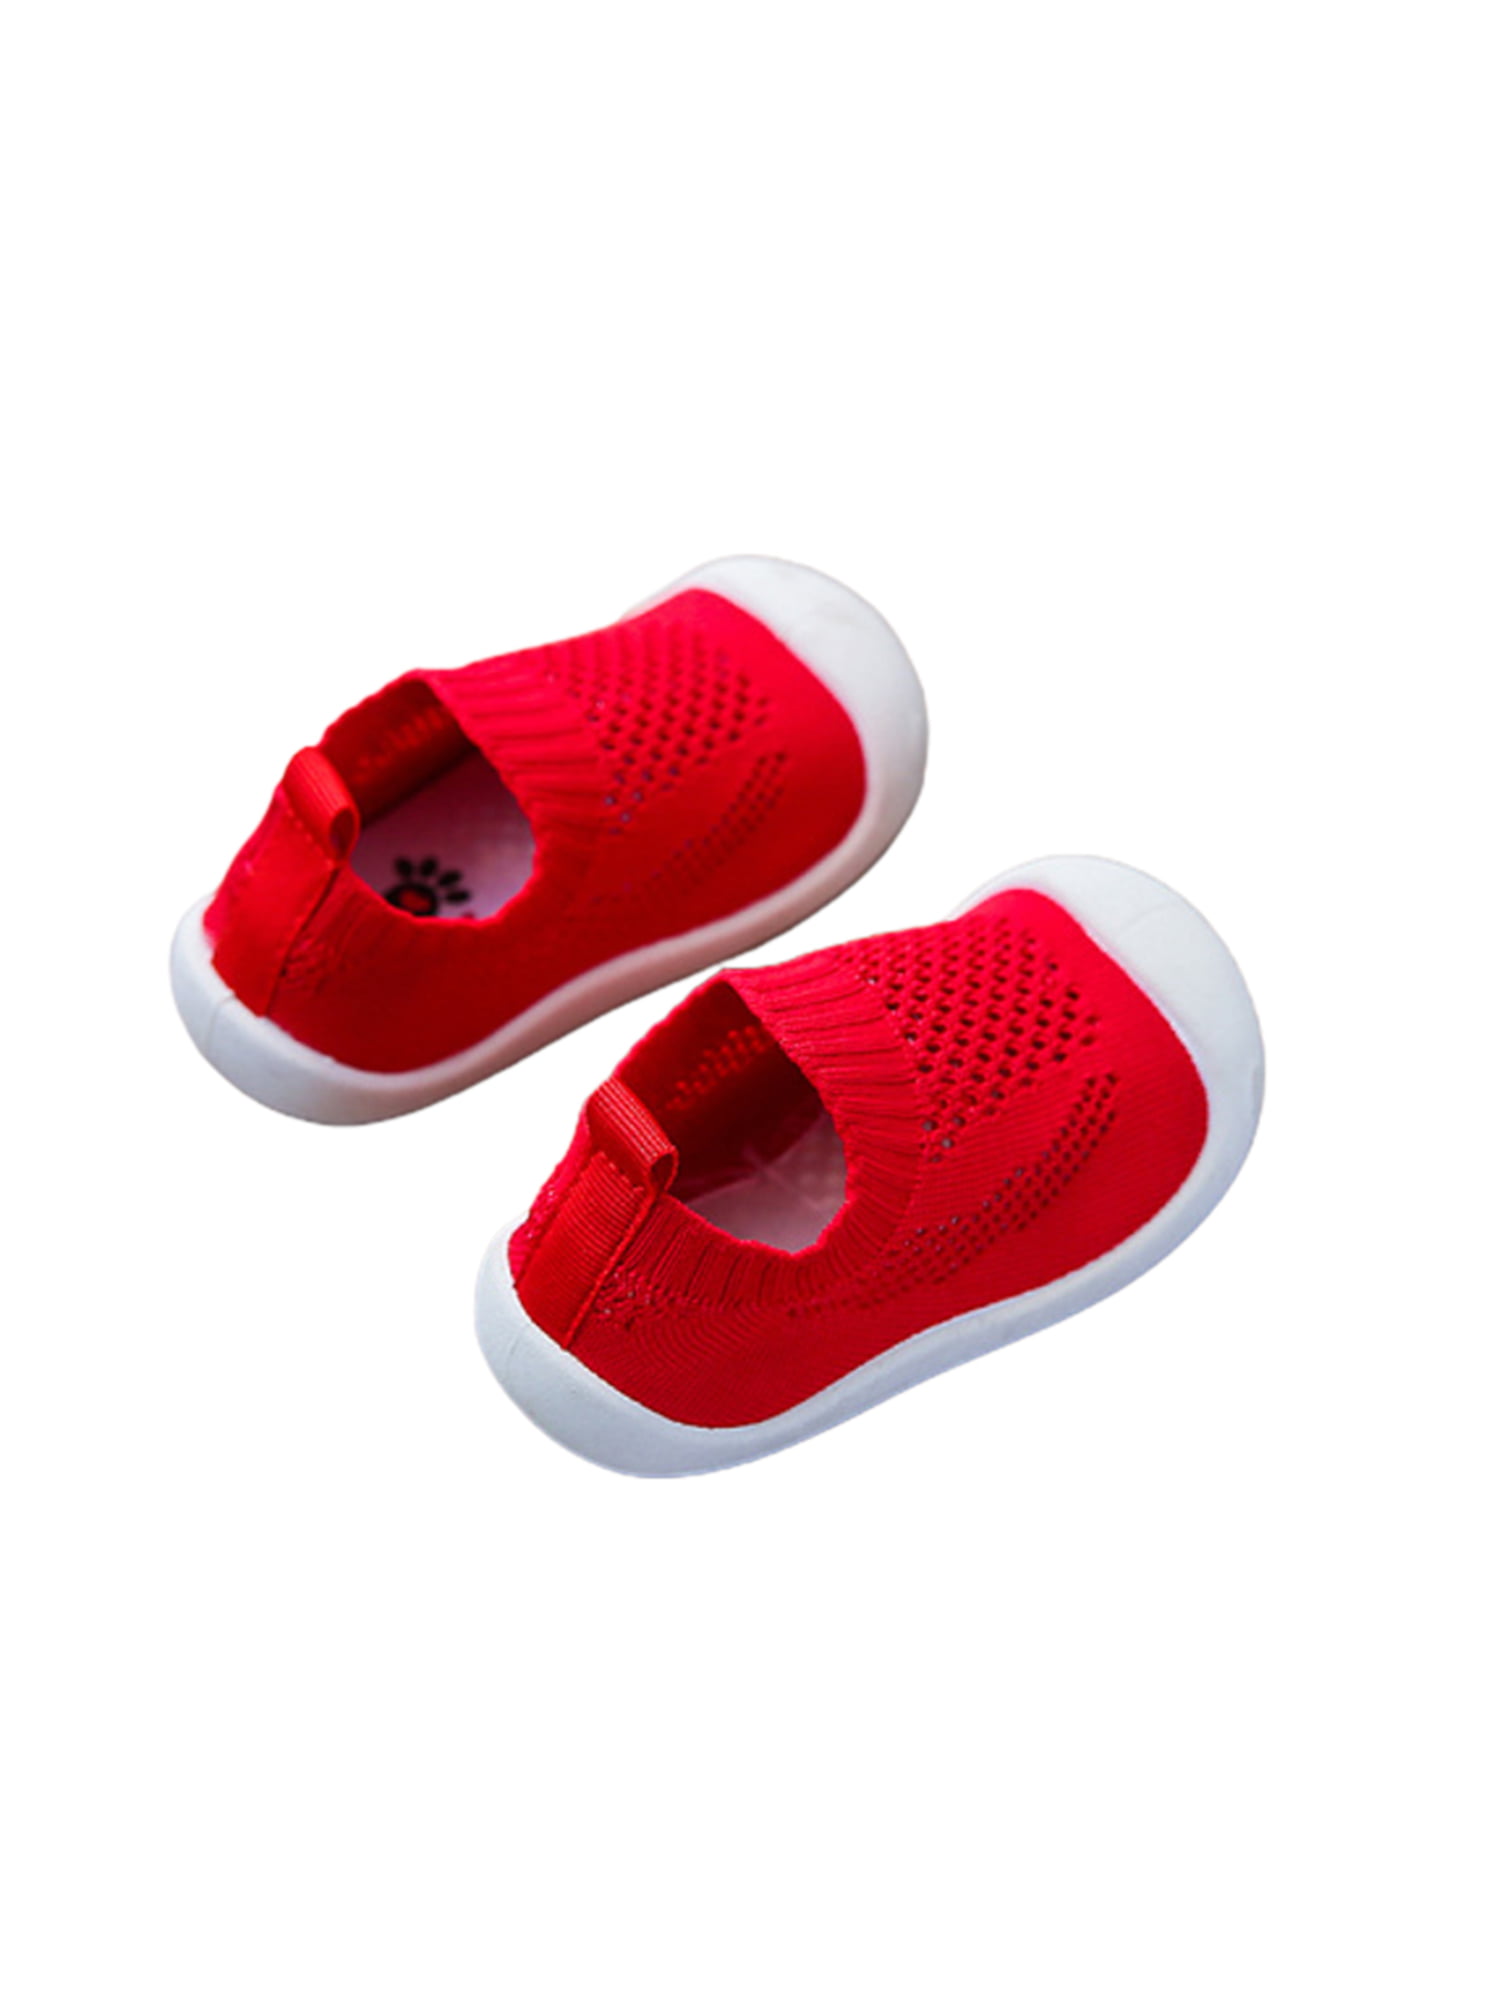 Breathable and Comfortable Fabric for Indoor Outdoor Gavena Baby Slipper Shoes Slip on Baby Kids First Walking Shoes with No-Slip Rubber Soft Sole